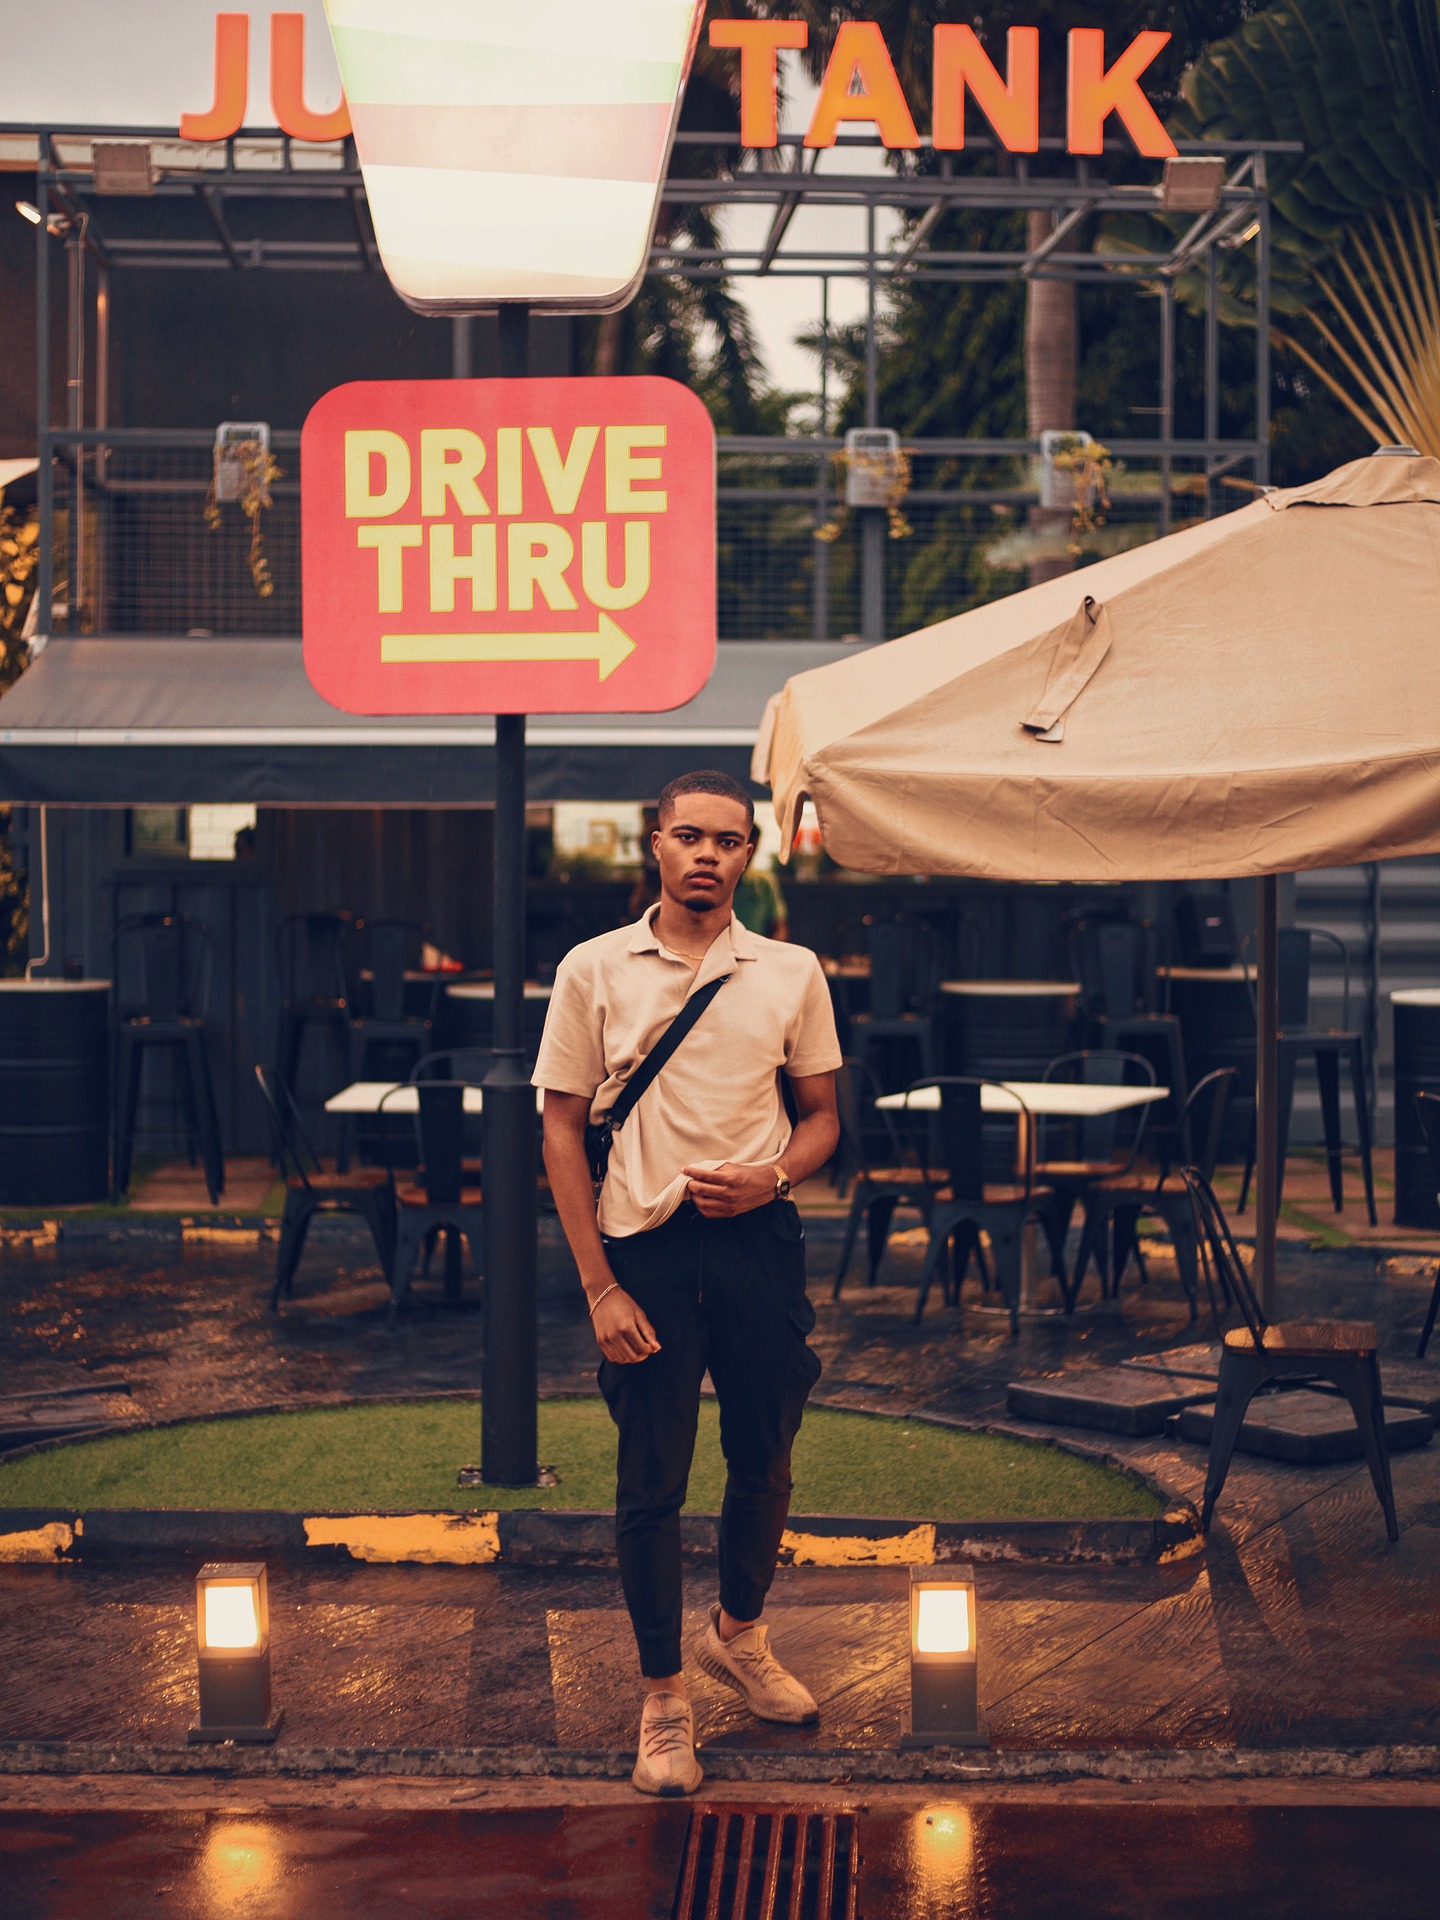 A man in front of the drive thru sign